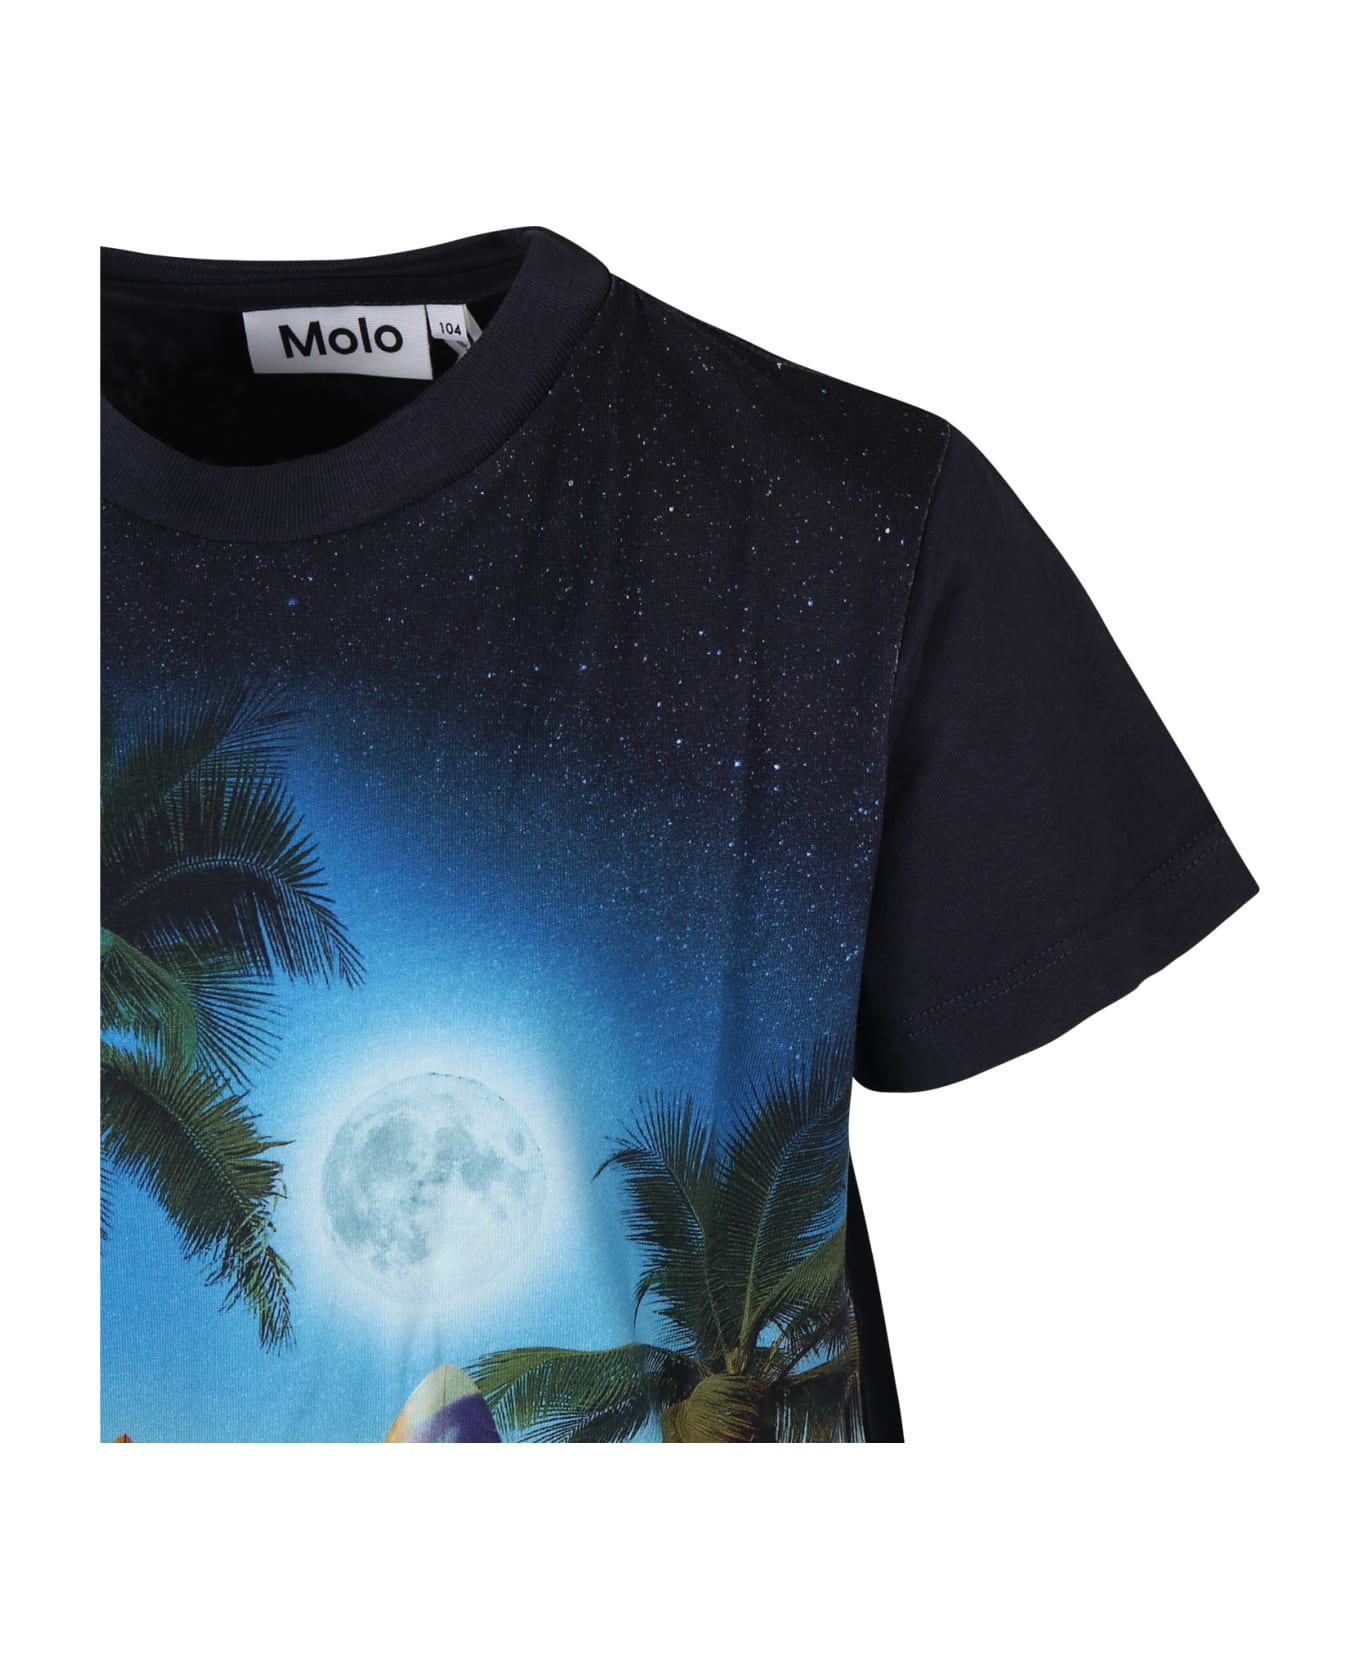 Molo Black T-shirt For Boy With Surfboard Print - Black Tシャツ＆ポロシャツ